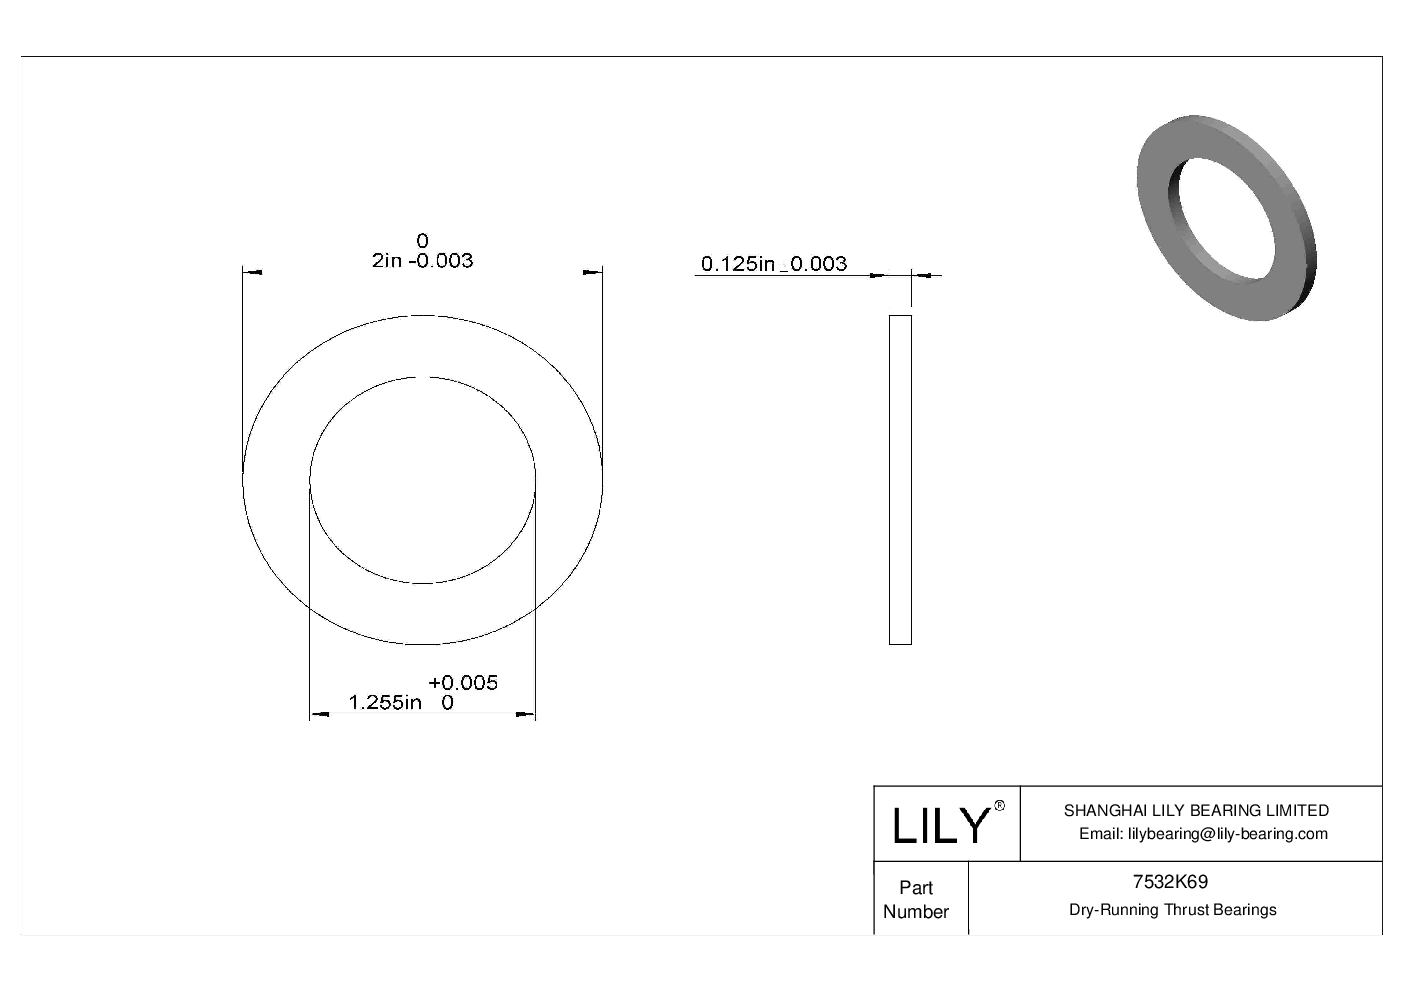 HFDCKGJ Water-Resistant Dry-Running Thrust Bearings cad drawing